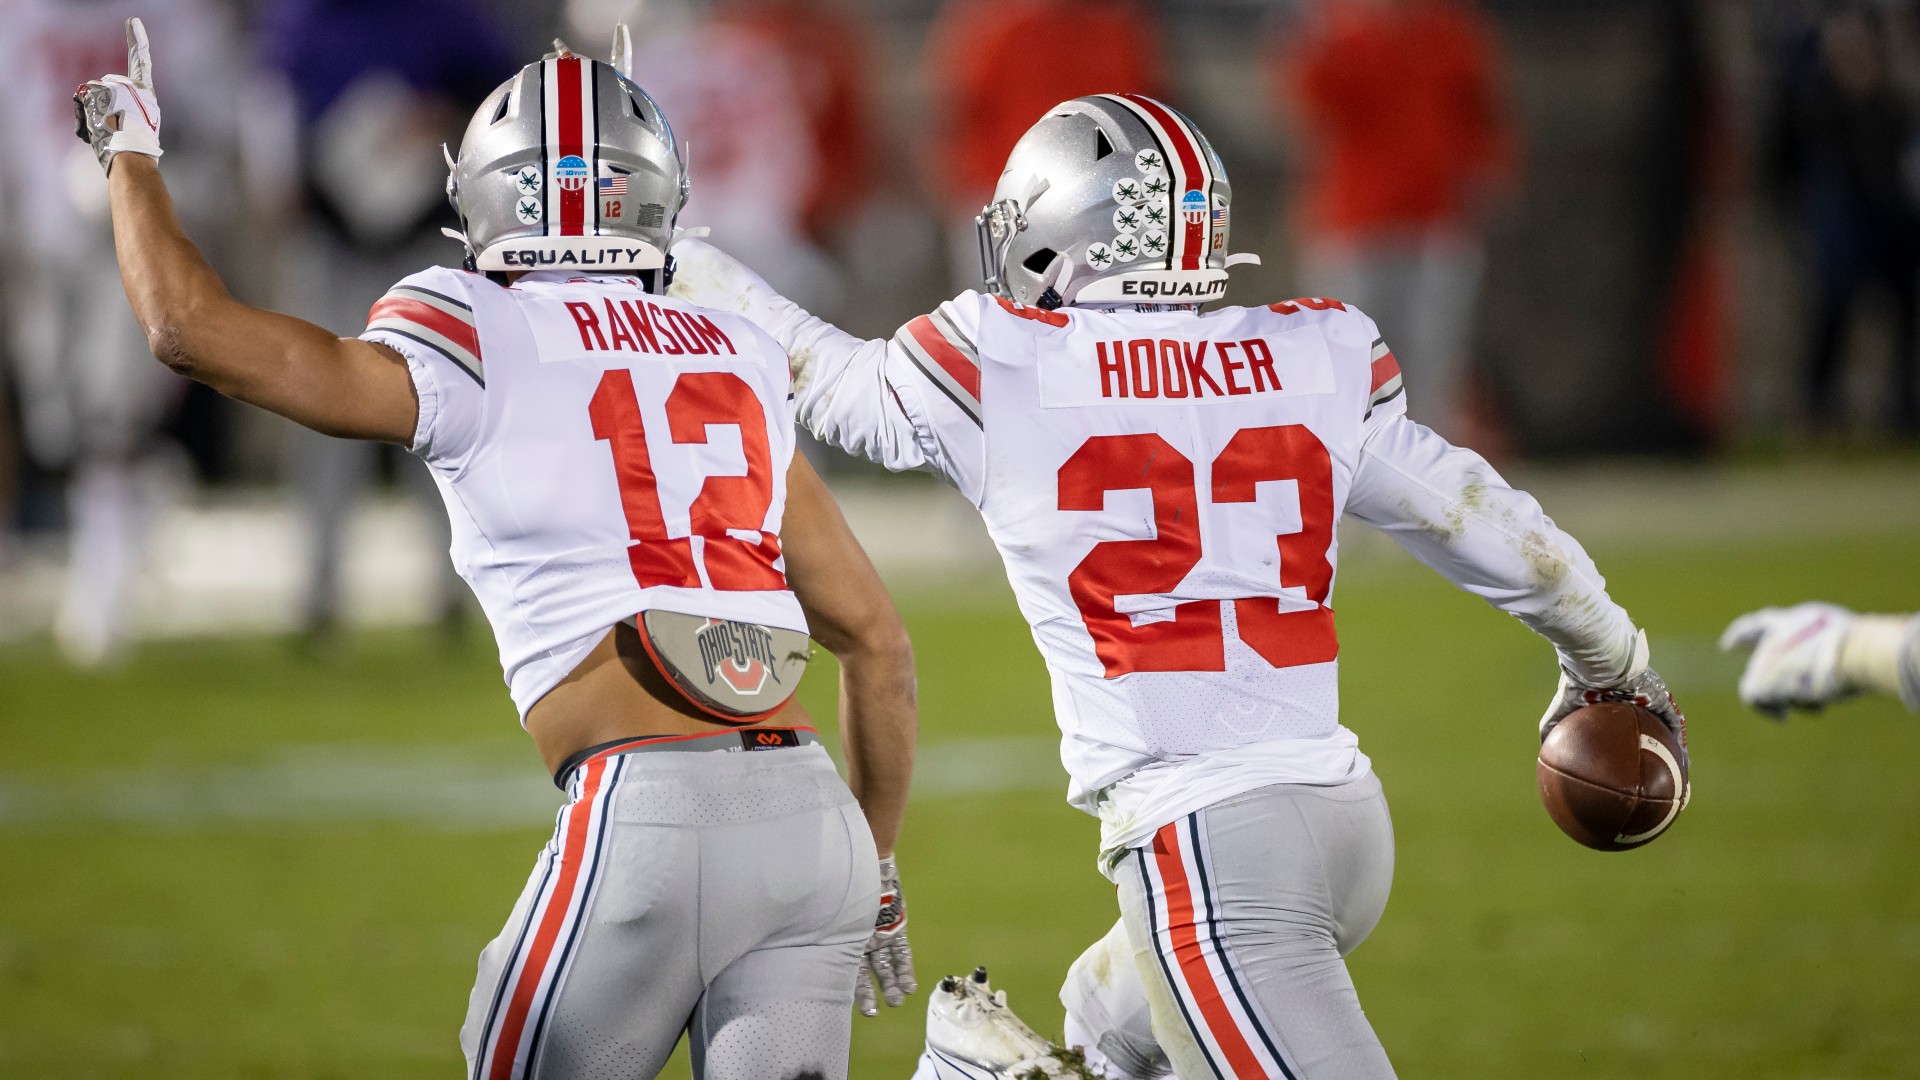 College Football Odds & Picks for Rutgers at Ohio State: How to Bet A Huge 39-Point Spread (Saturday, Nov. 7) article feature image